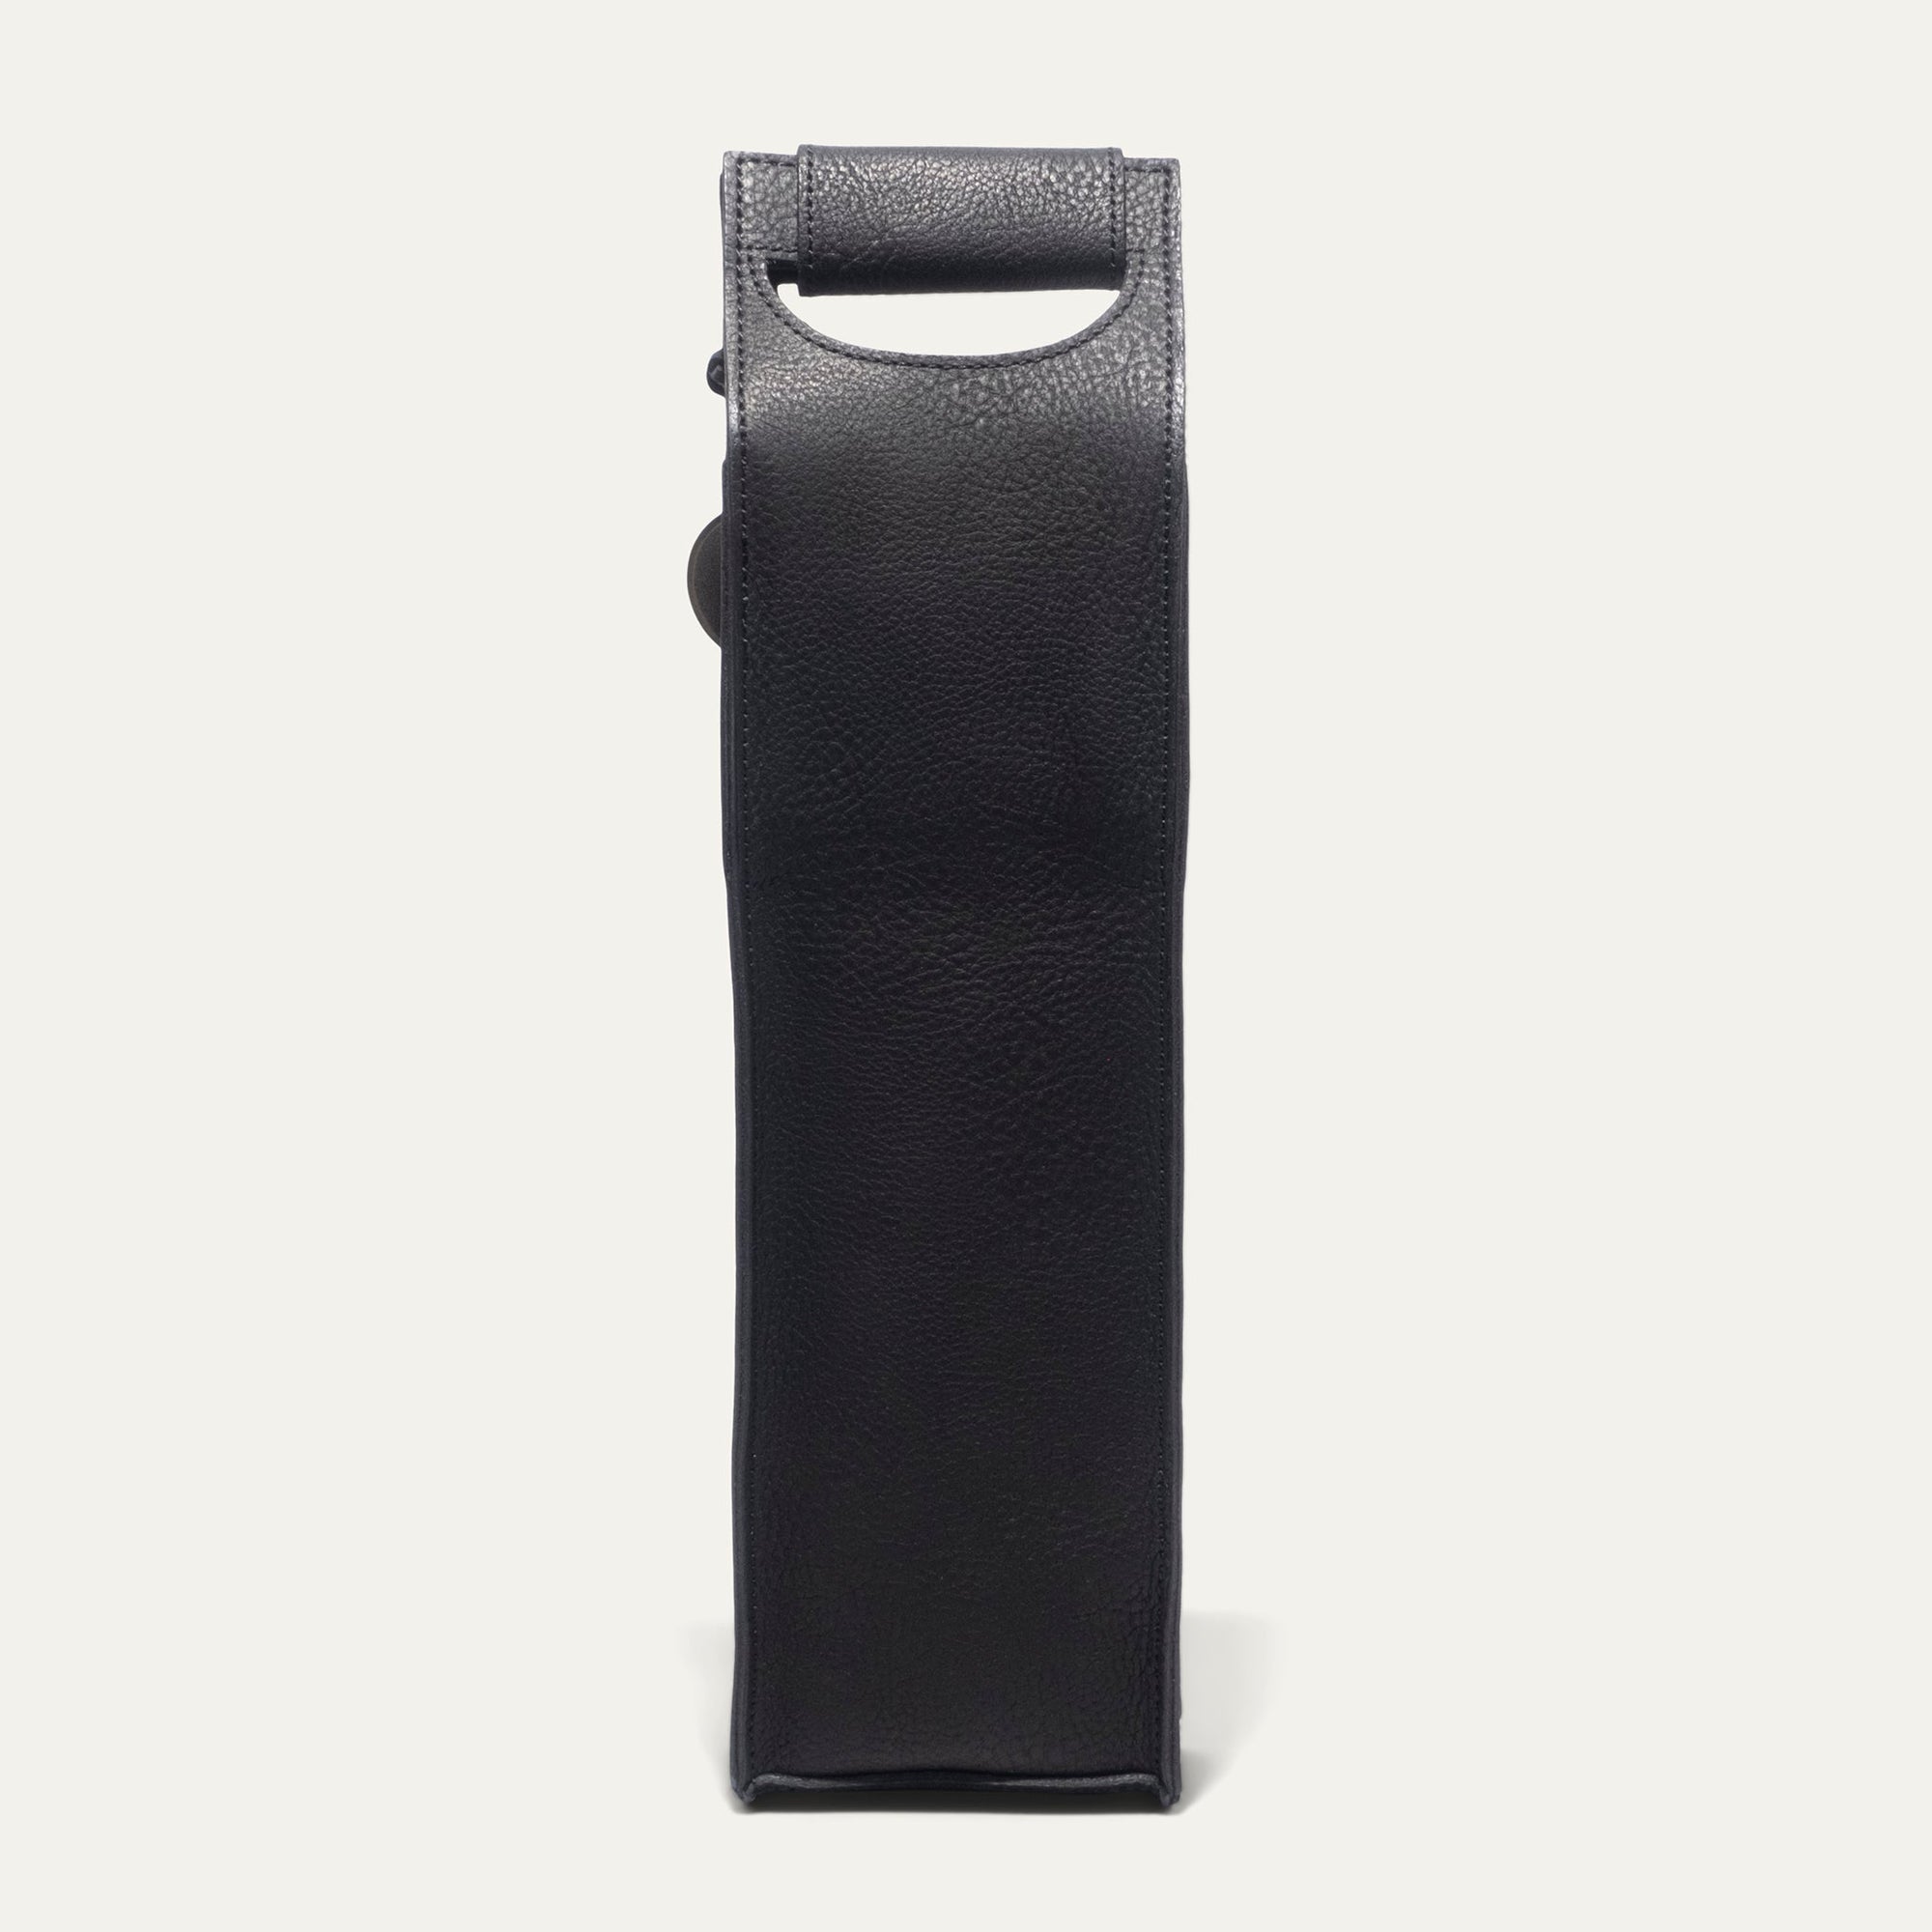 Leather Wine Bottle Case in Black by Will Leather Goods